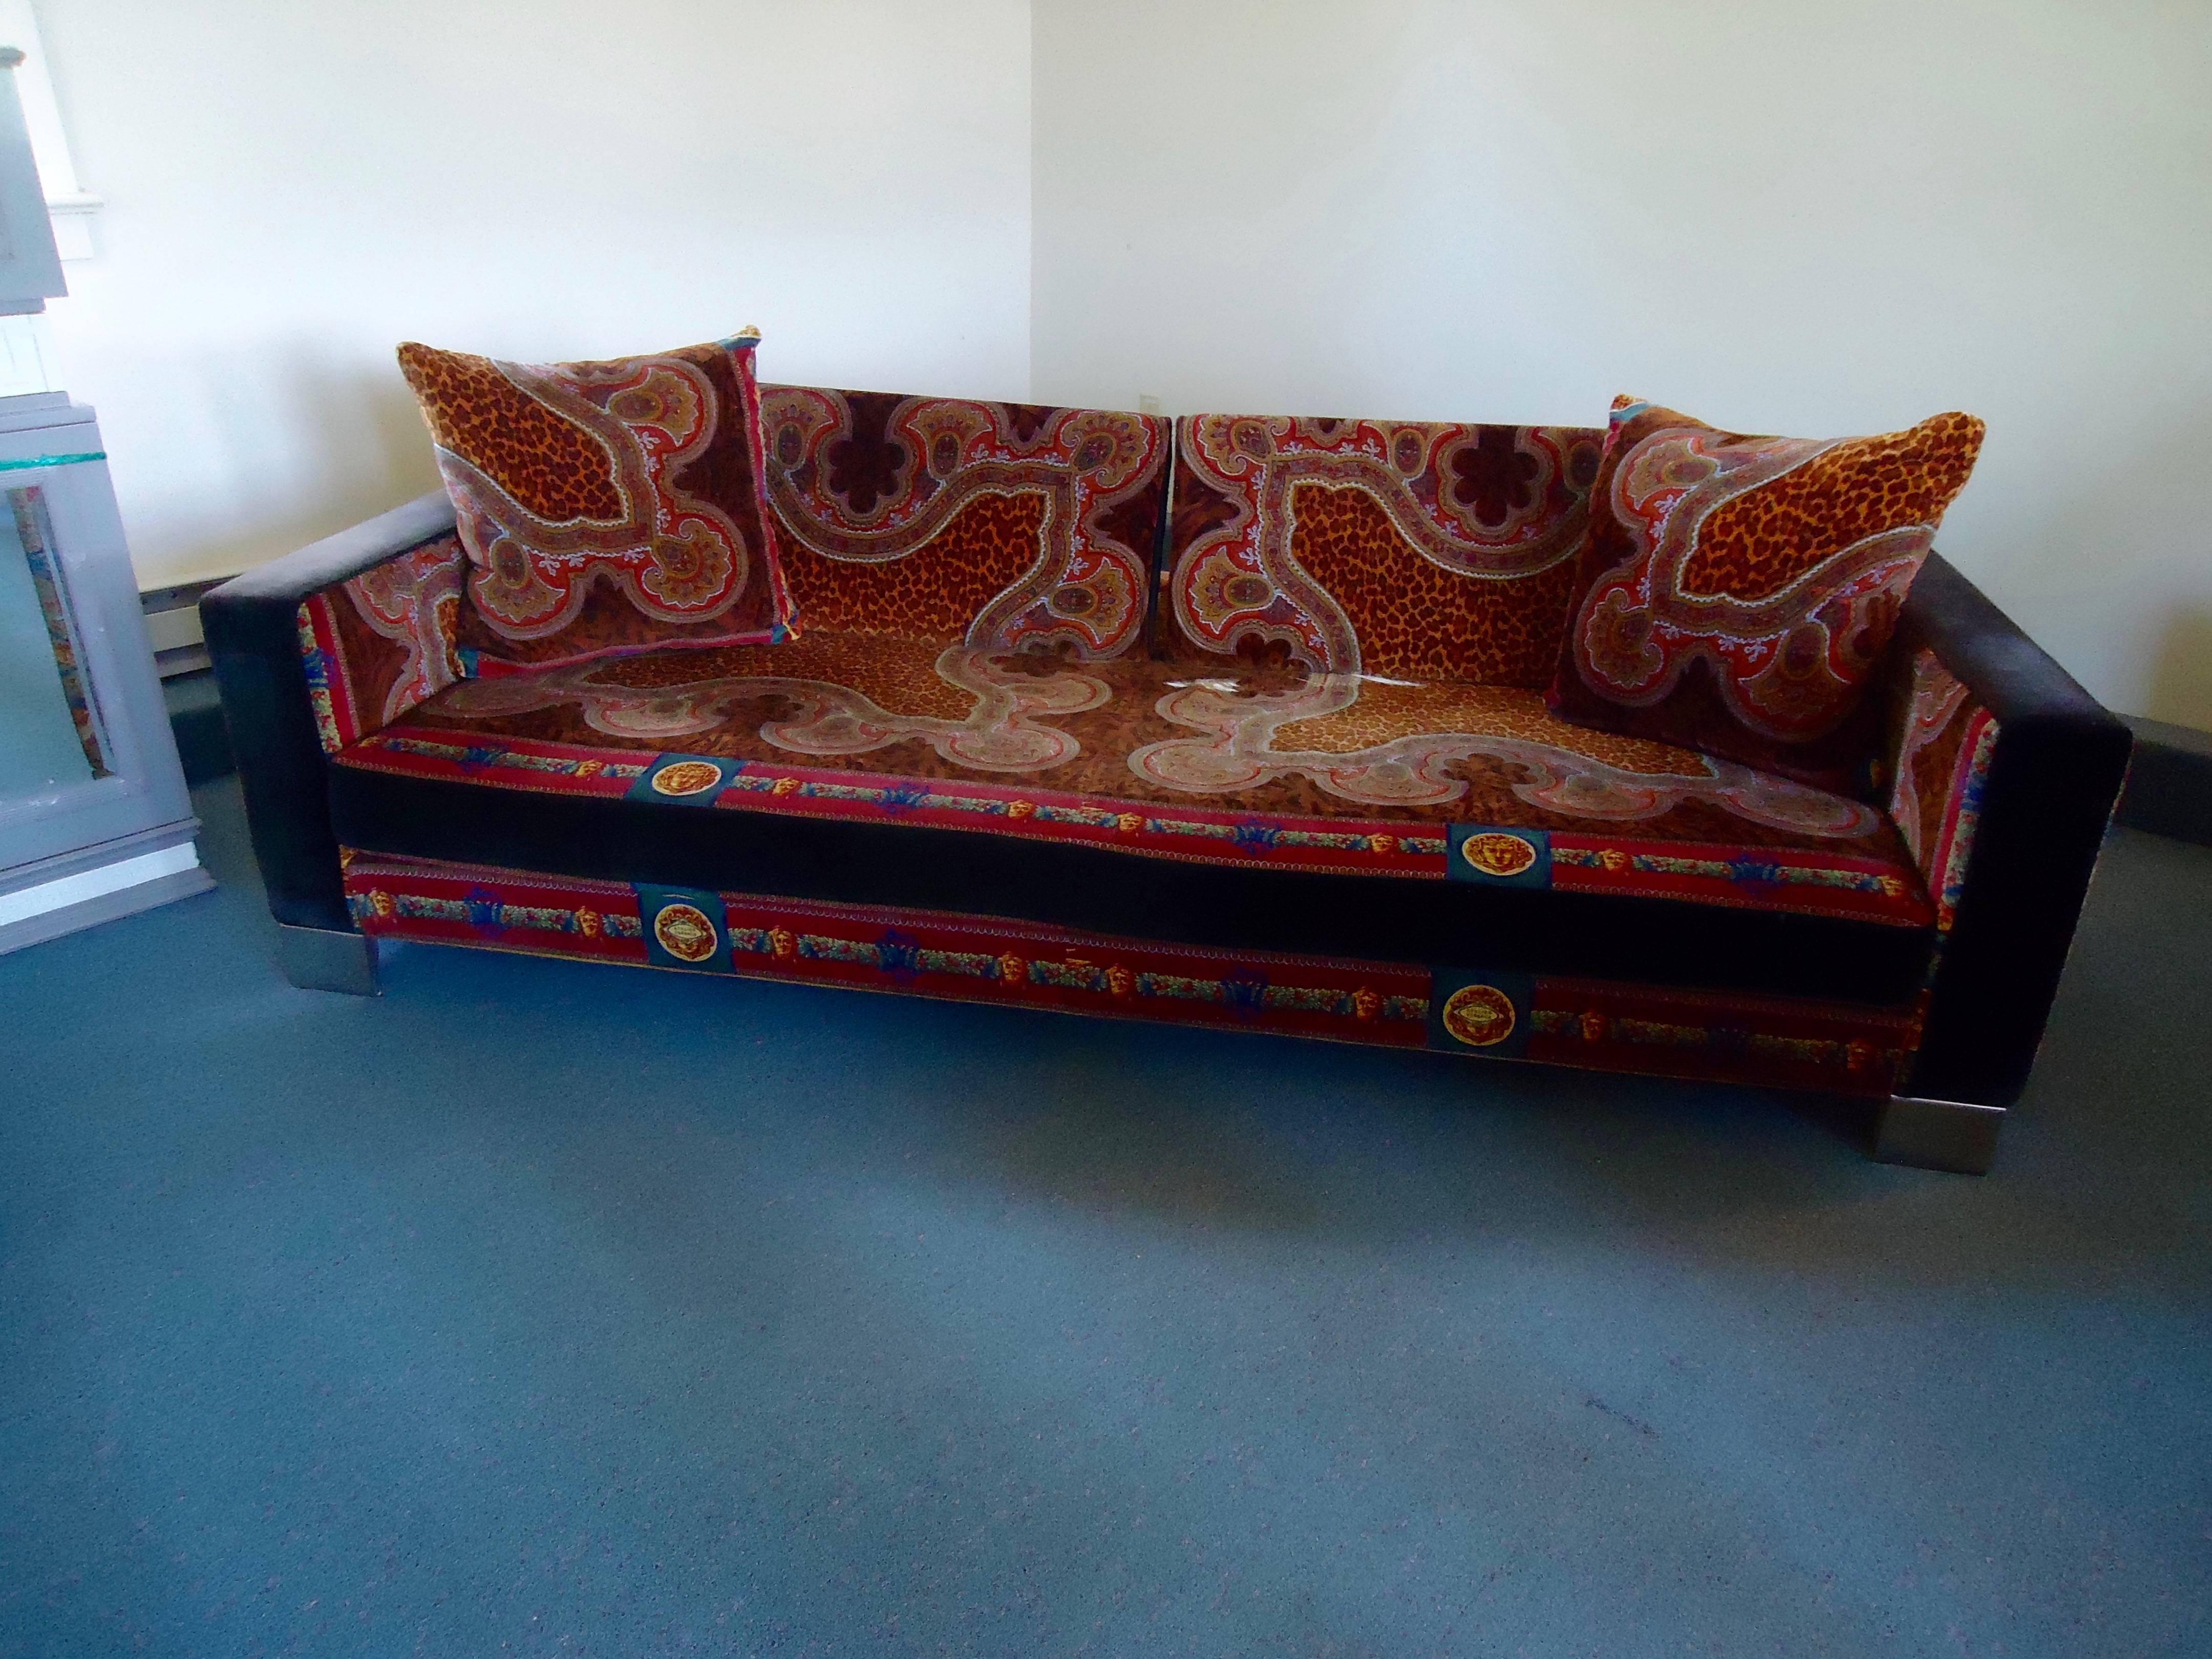 A much loved spectacular daybed or couch from the Versace Atelier showroom in NYC, bought about 35 years ago in NYC. Covered in a sumptuous riot of pattern and color, the two back cushions swing back and forth to allow either a comfortable twin bed,